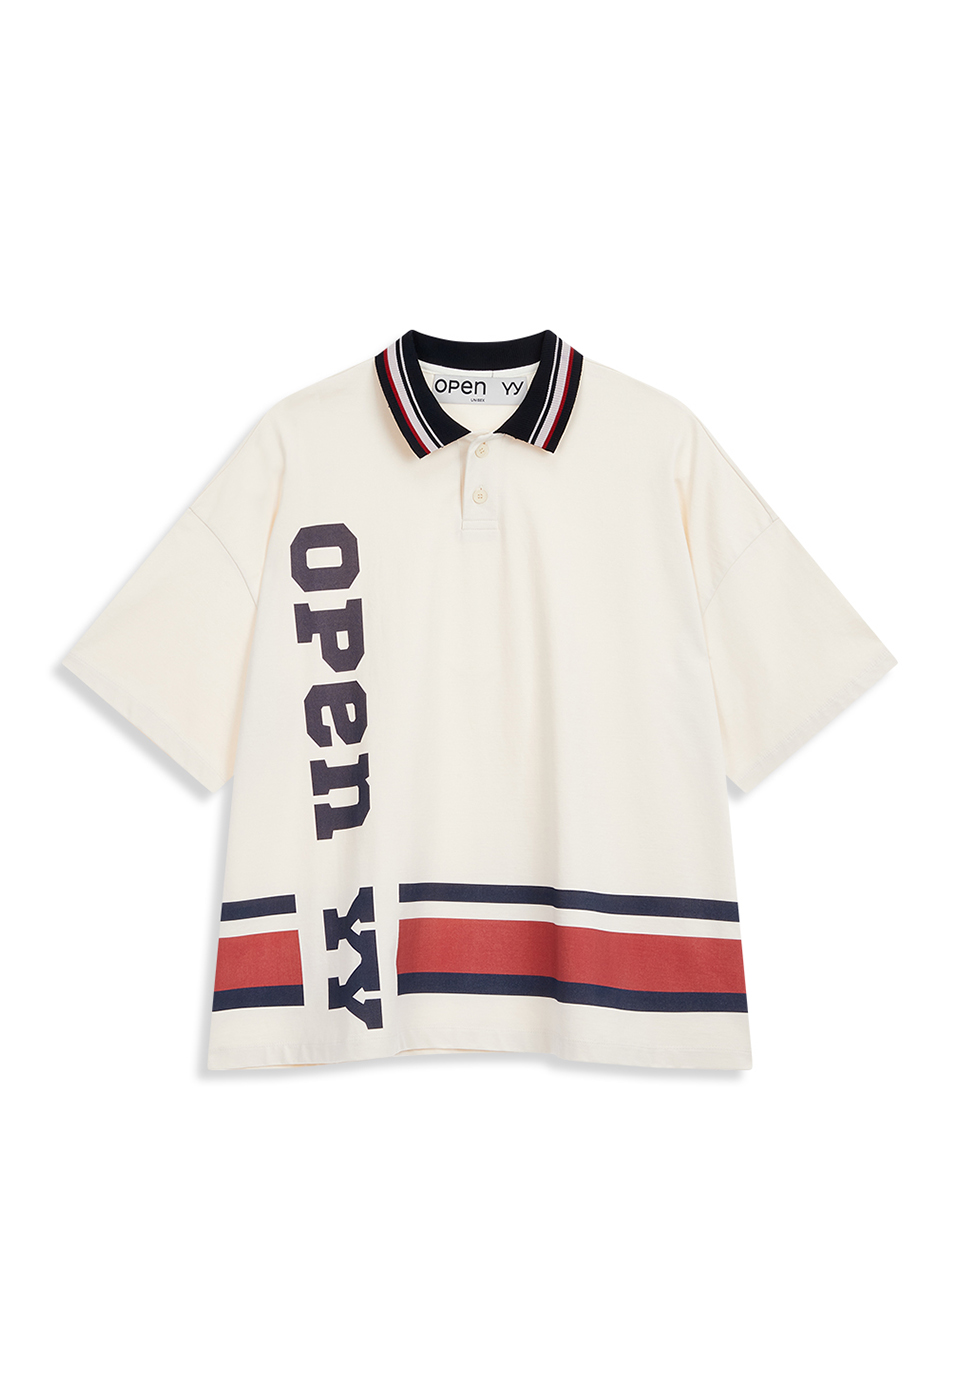 OPEN YY COLLARED T-SHIRT, IVORY